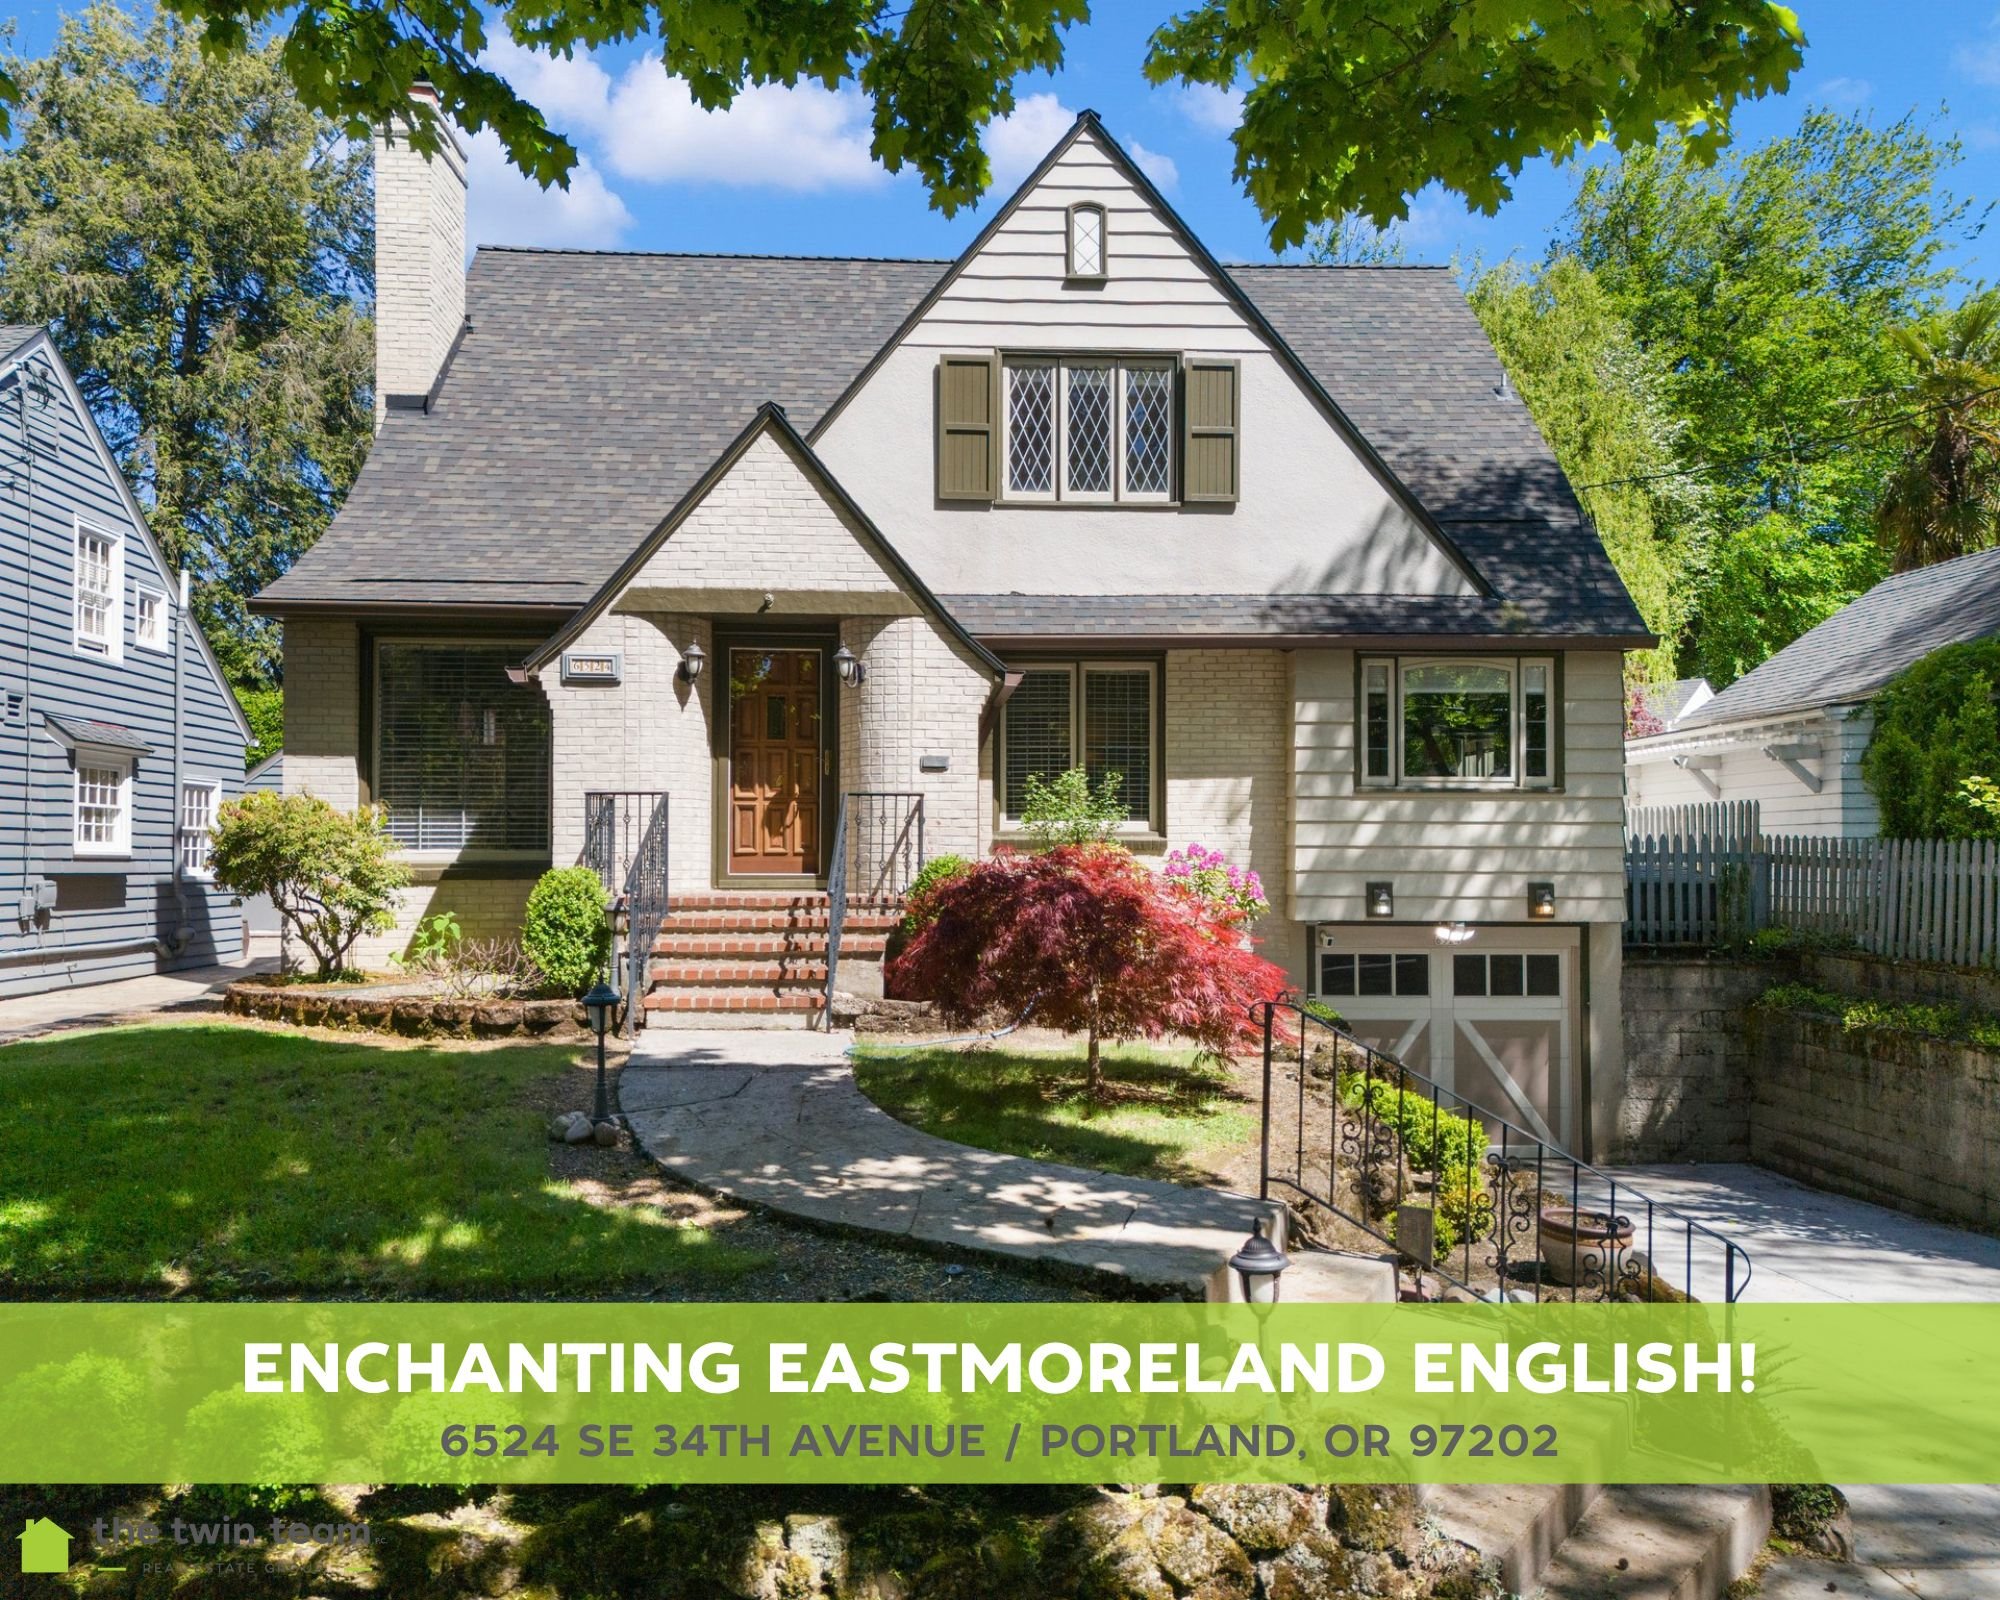 JUST LISTED!!
📍6524 SE 34th Avenue, Portland, OR 97202
🛏 3 Beds
🛁 2 Baths
📐 2907 Sq Ft
💰 $849,900

Enchanting English in one of Portland's most sought-after neighborhoods. Perched high above the street offering privacy &amp; treetop views; lovin